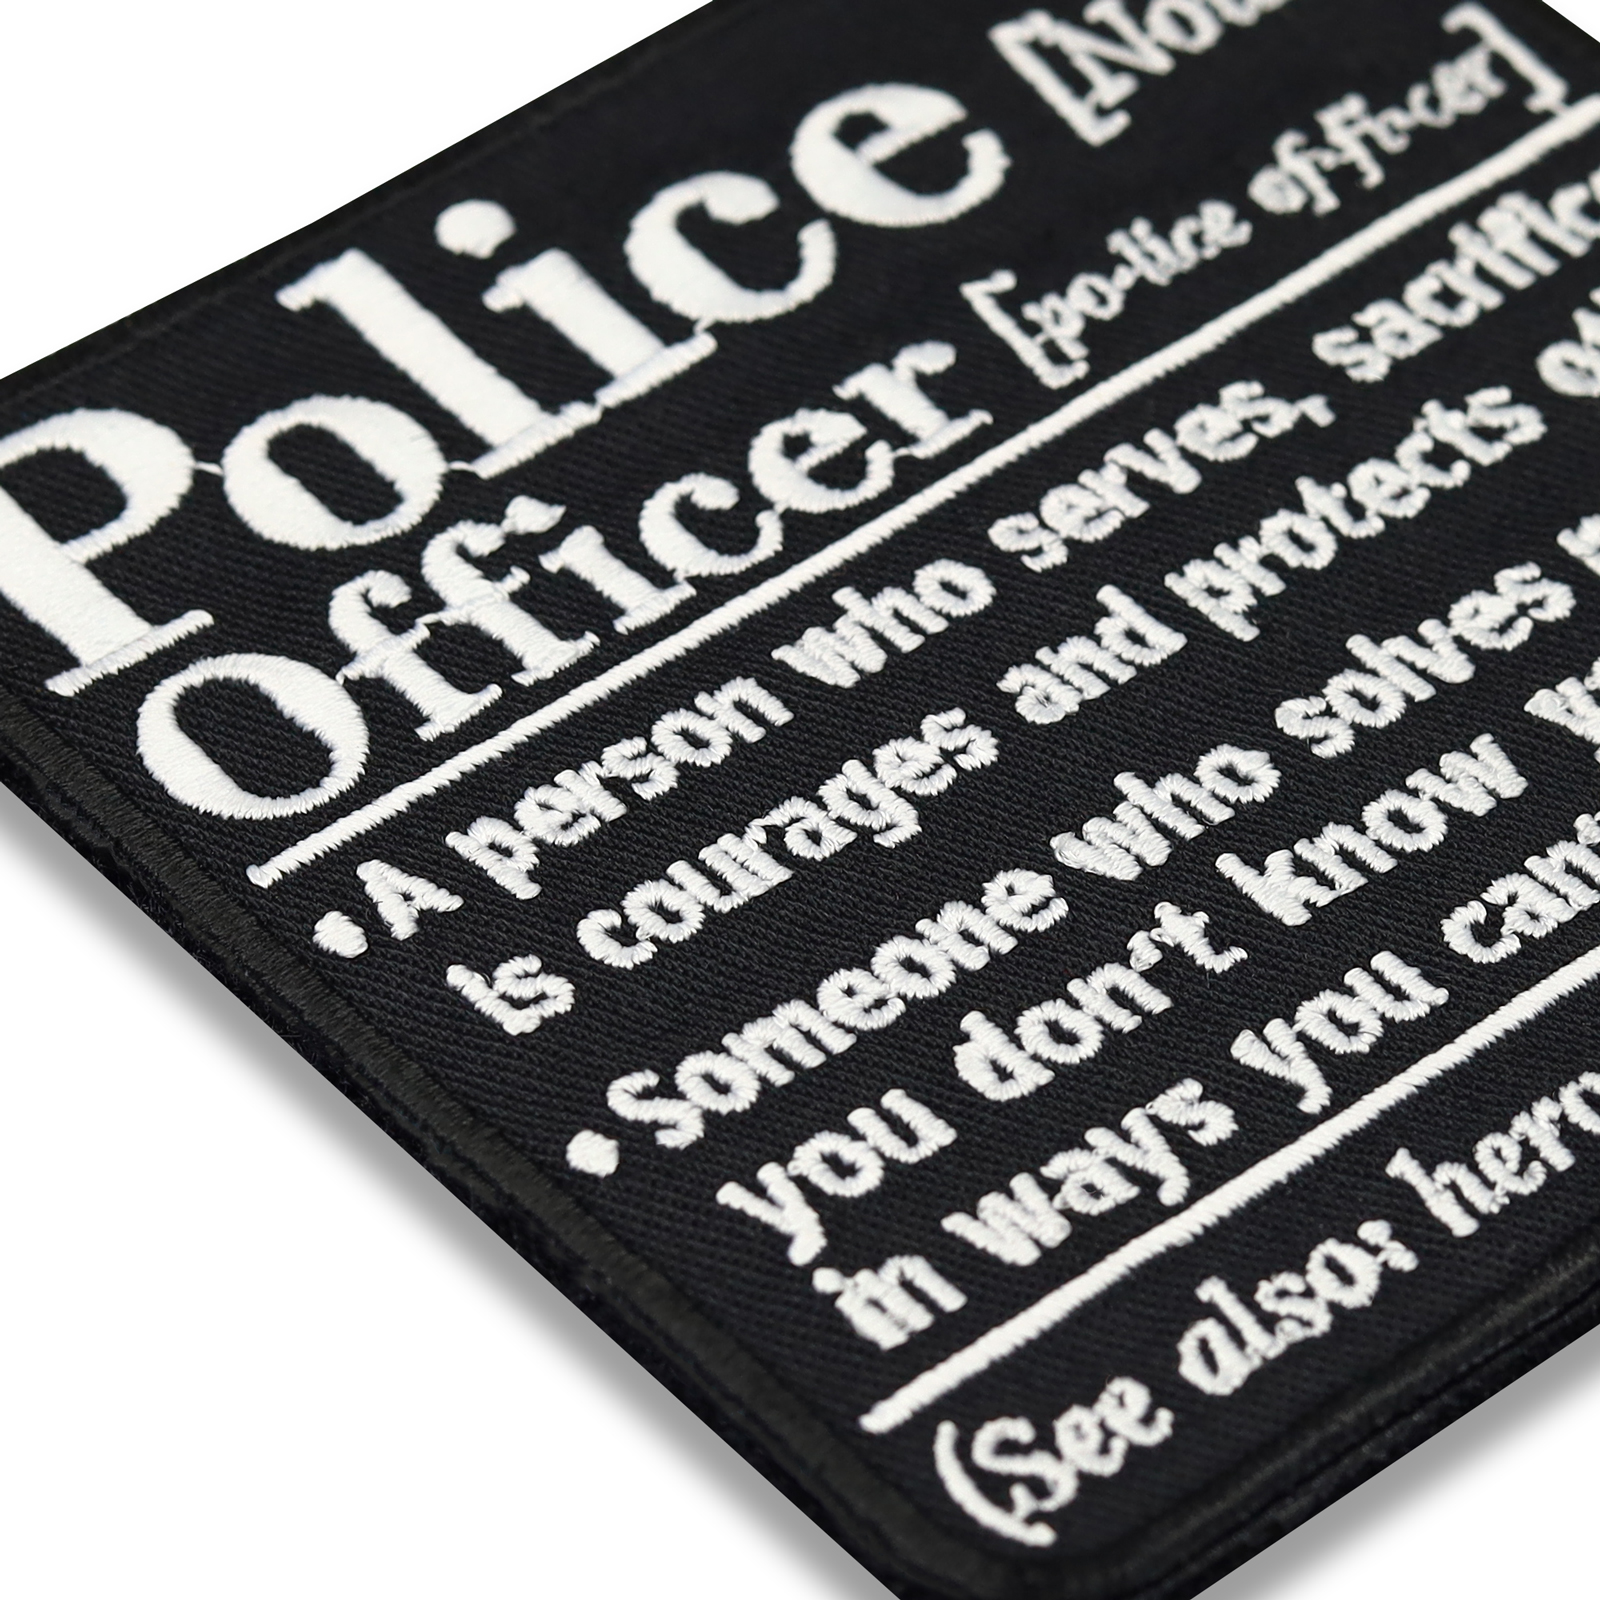 Police Officer - Patch